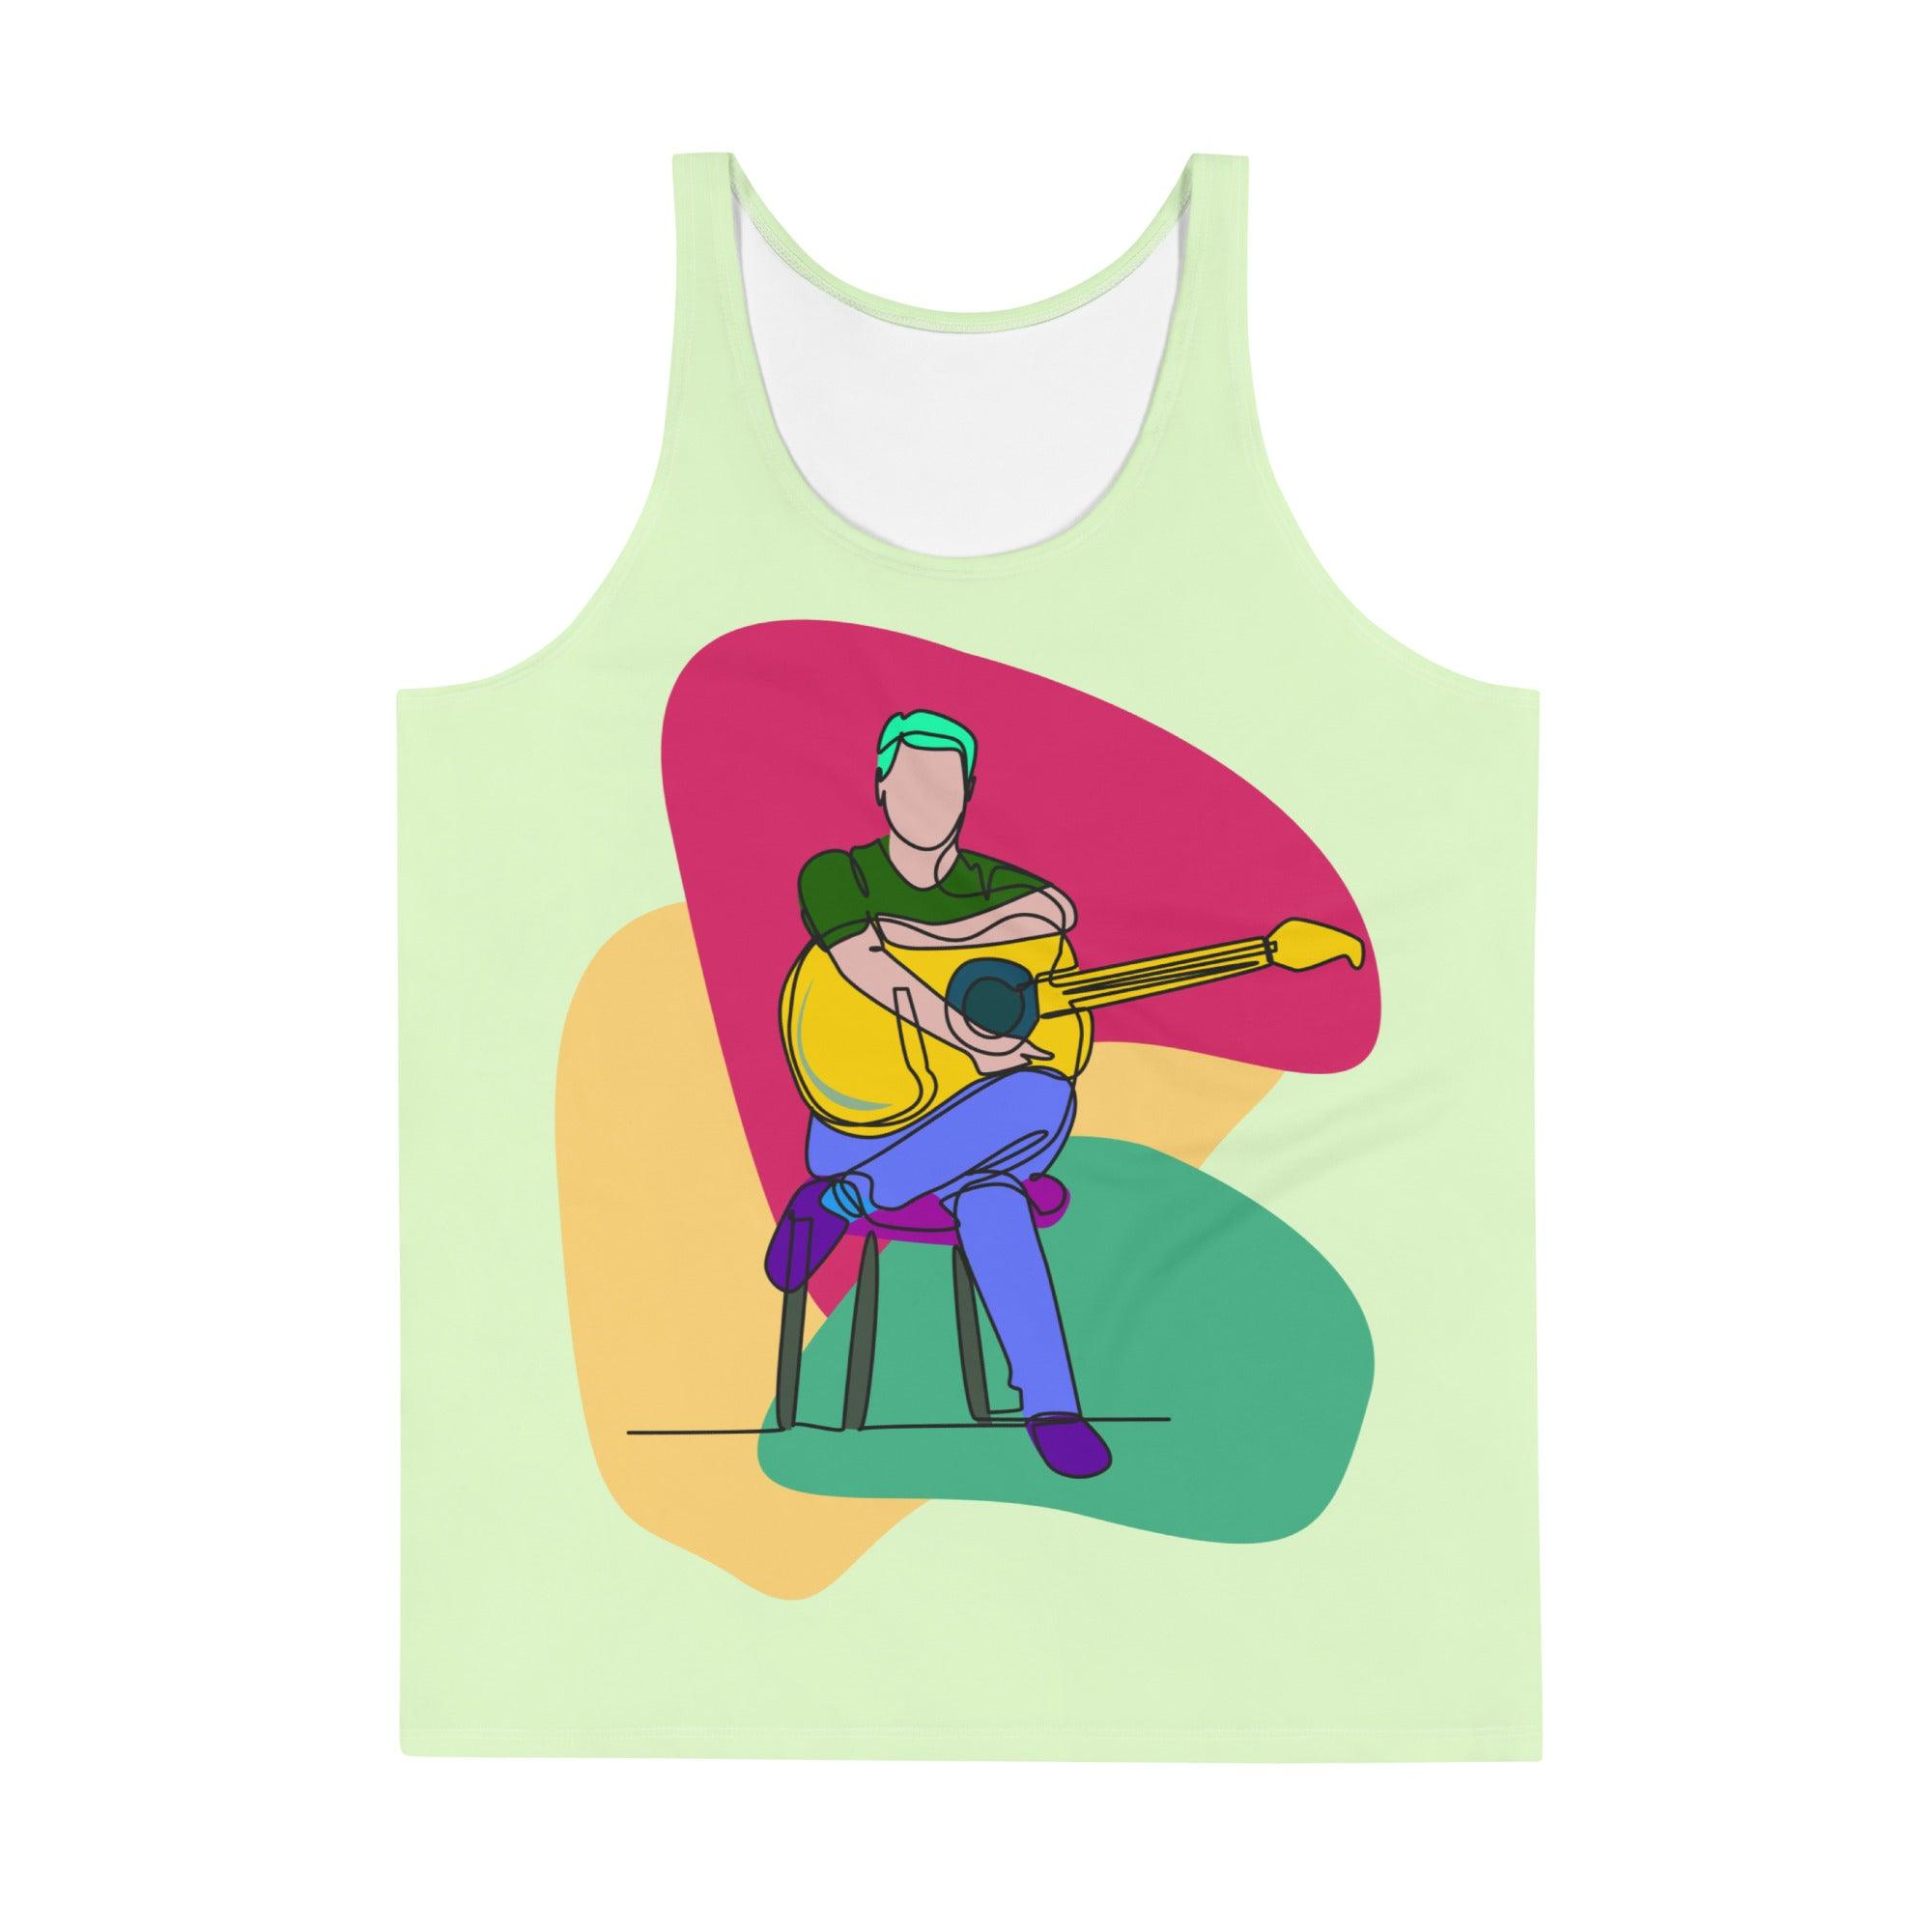 Music-themed tank top for men and women